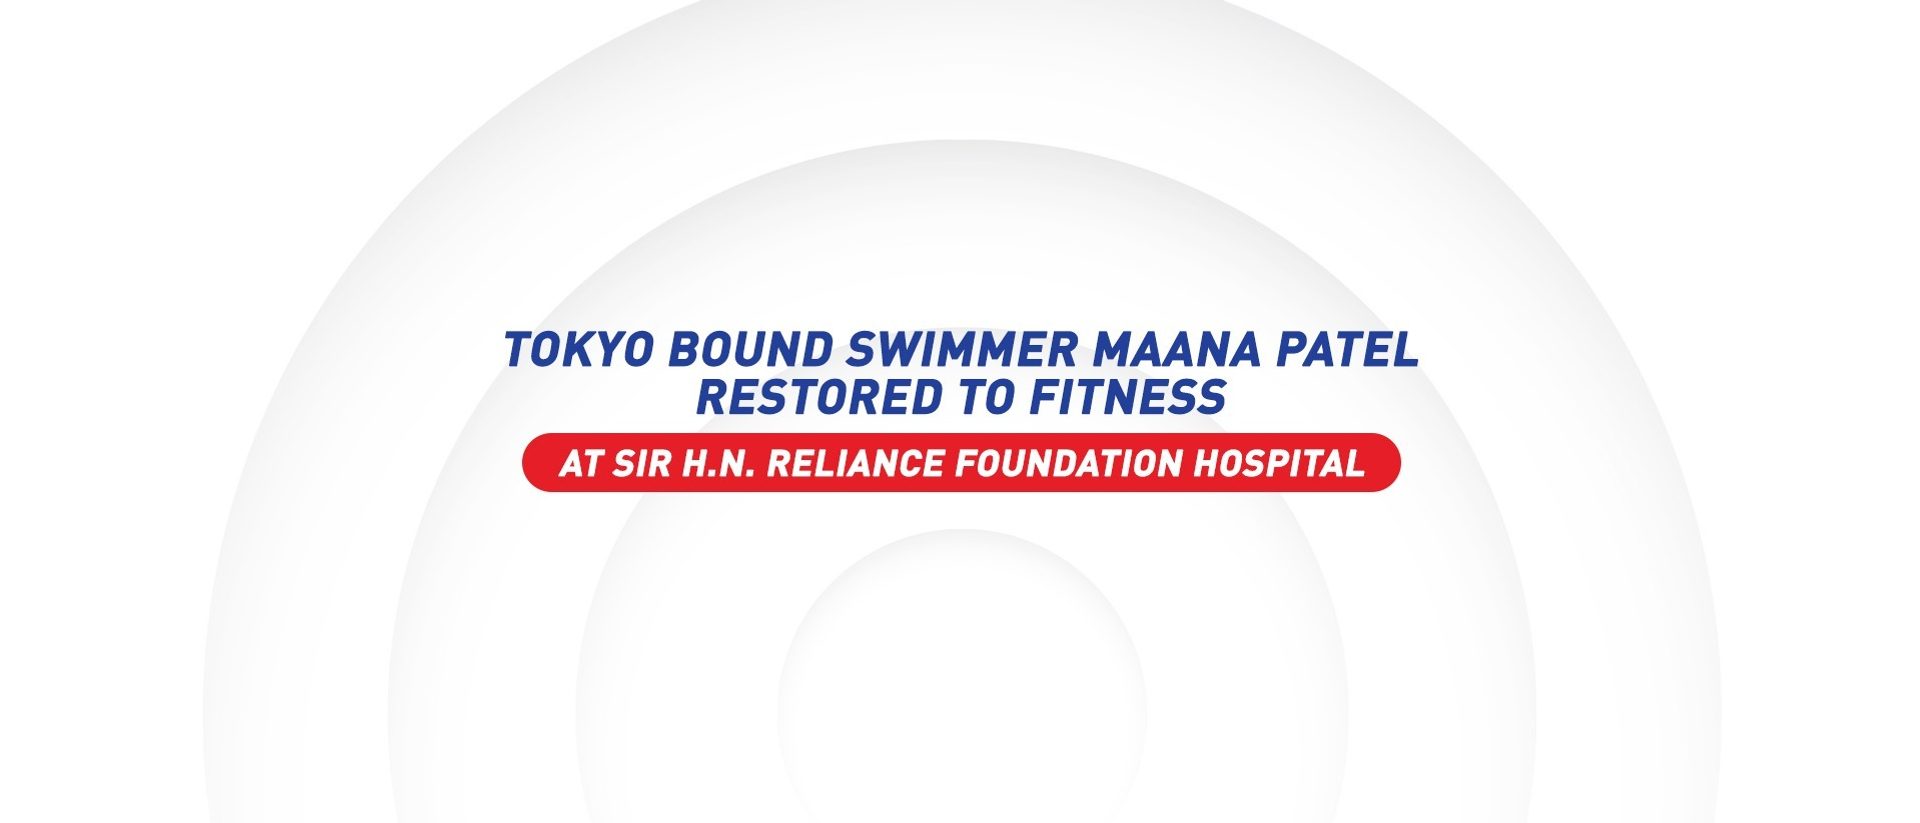     How Tokyo Bound Swimmer Maana Patel Was Restored to Full Health at Sir H N Reliance Foundation Hospital